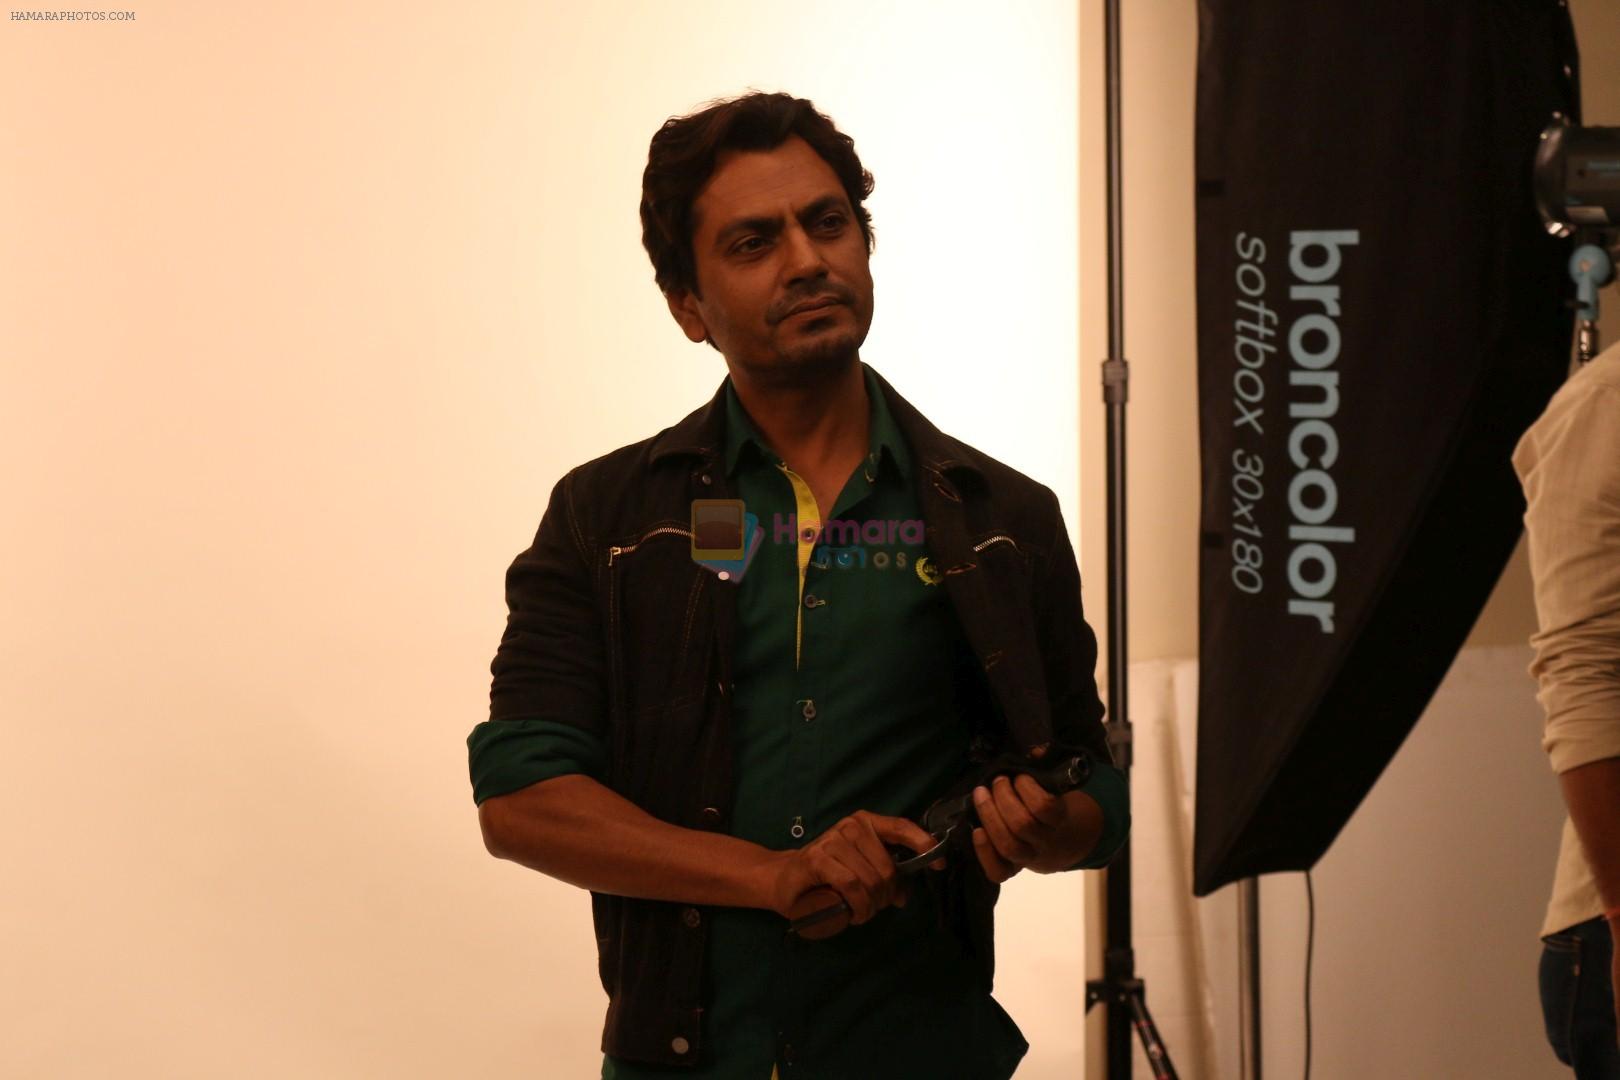 Nawazuddin Siddiqui at the Shooting For His First Movie Poster Of His Upcoming Film Babumoshai Bandookbaaz's on 19th March 2017